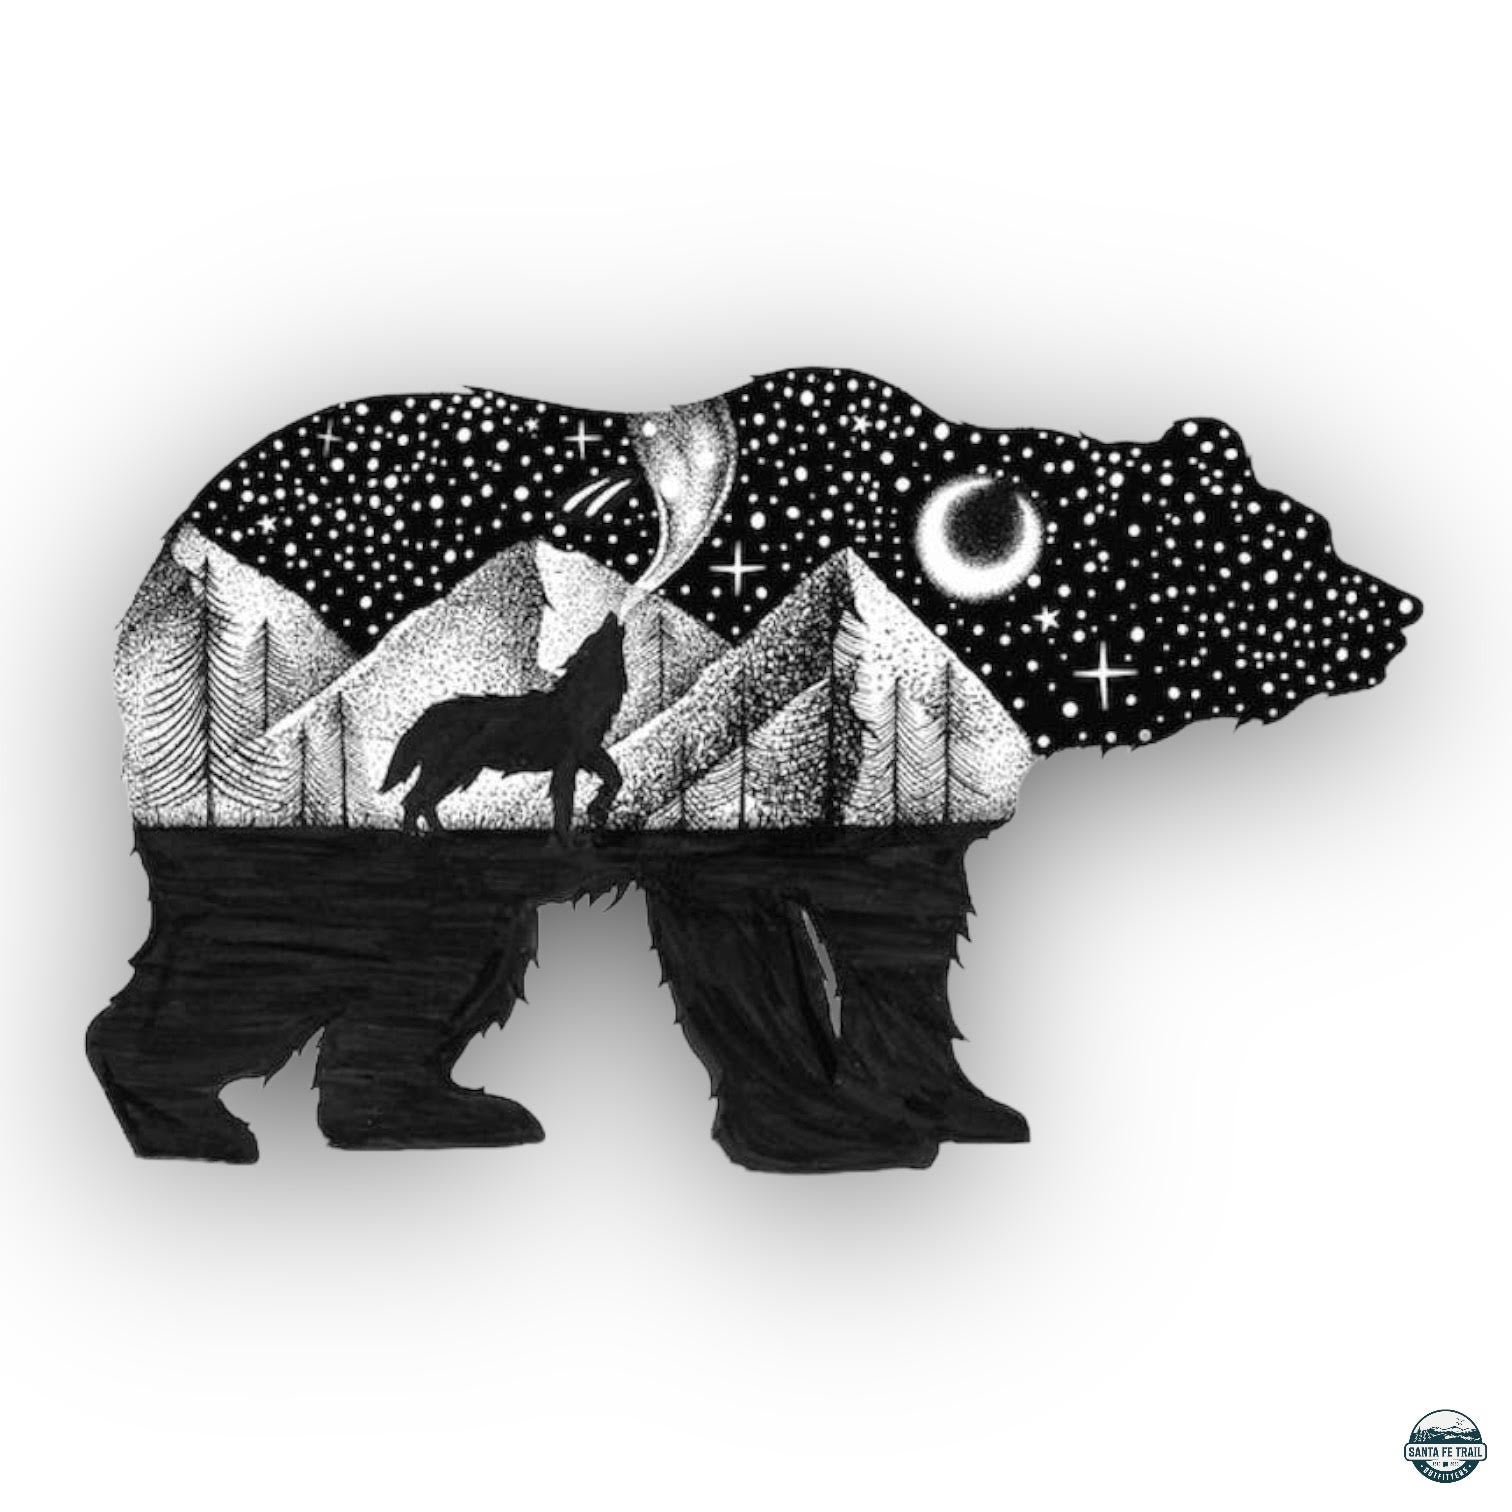 The Bear and Mountains Outdoor Animal Nature Sticker